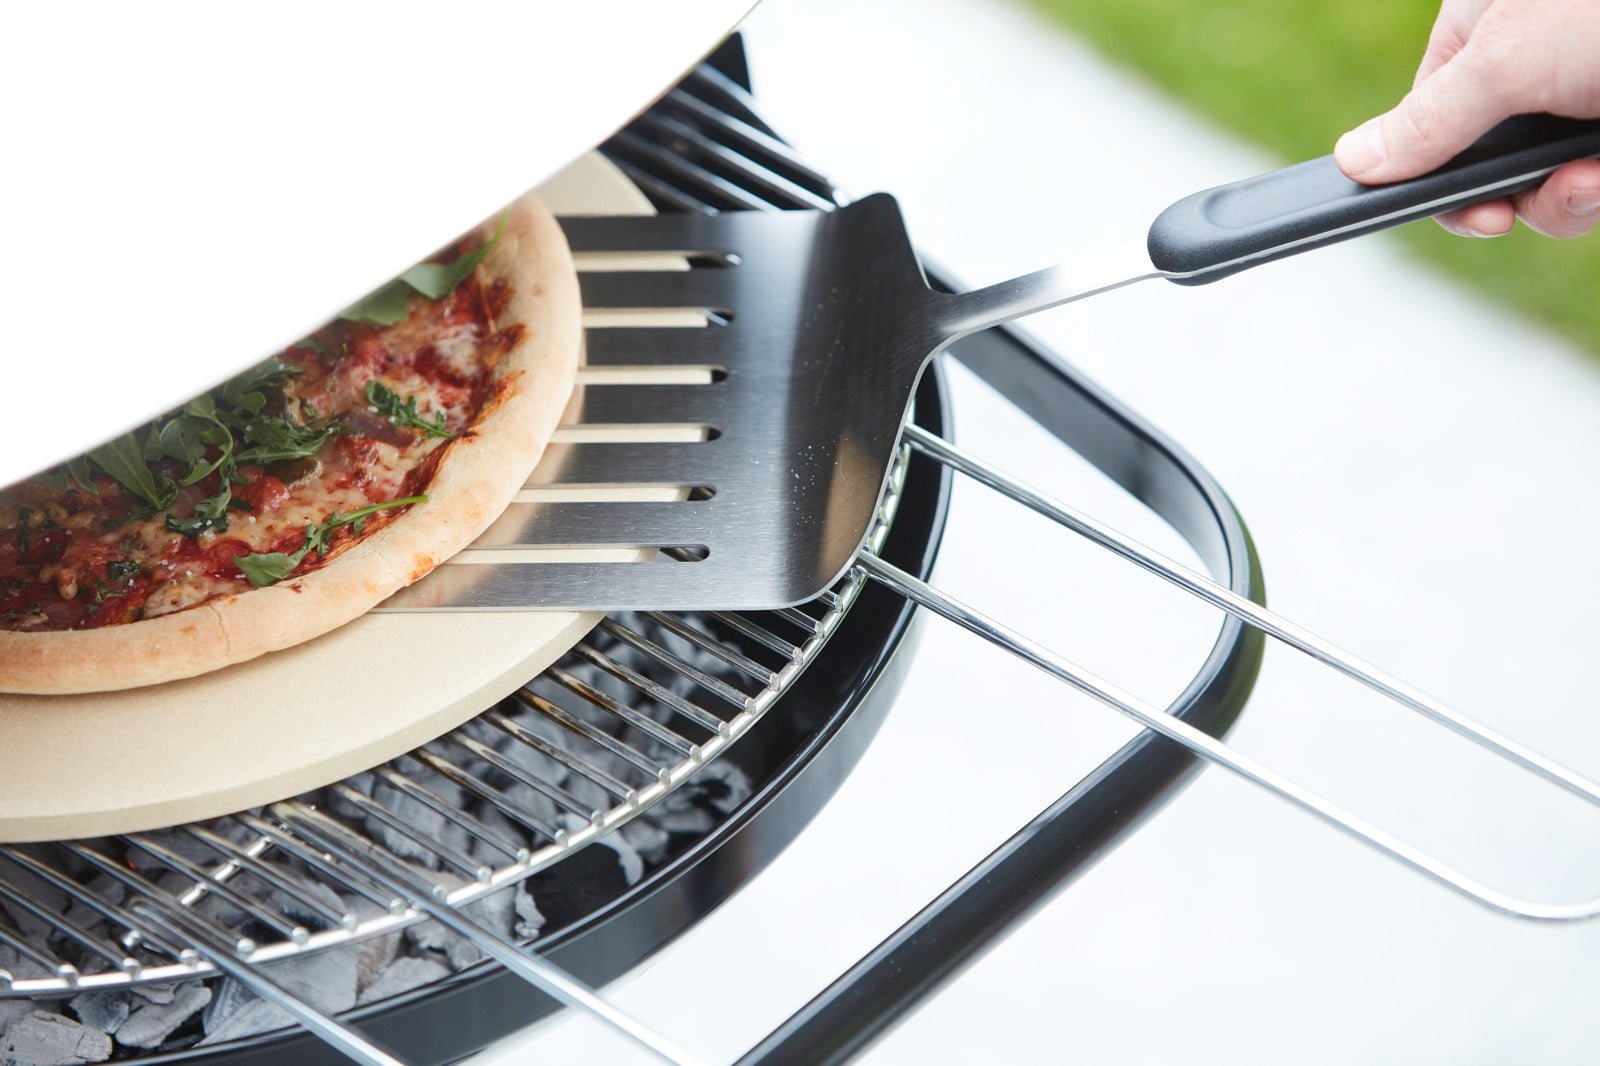 Explore more: Barbecook's countless barbecue accessories